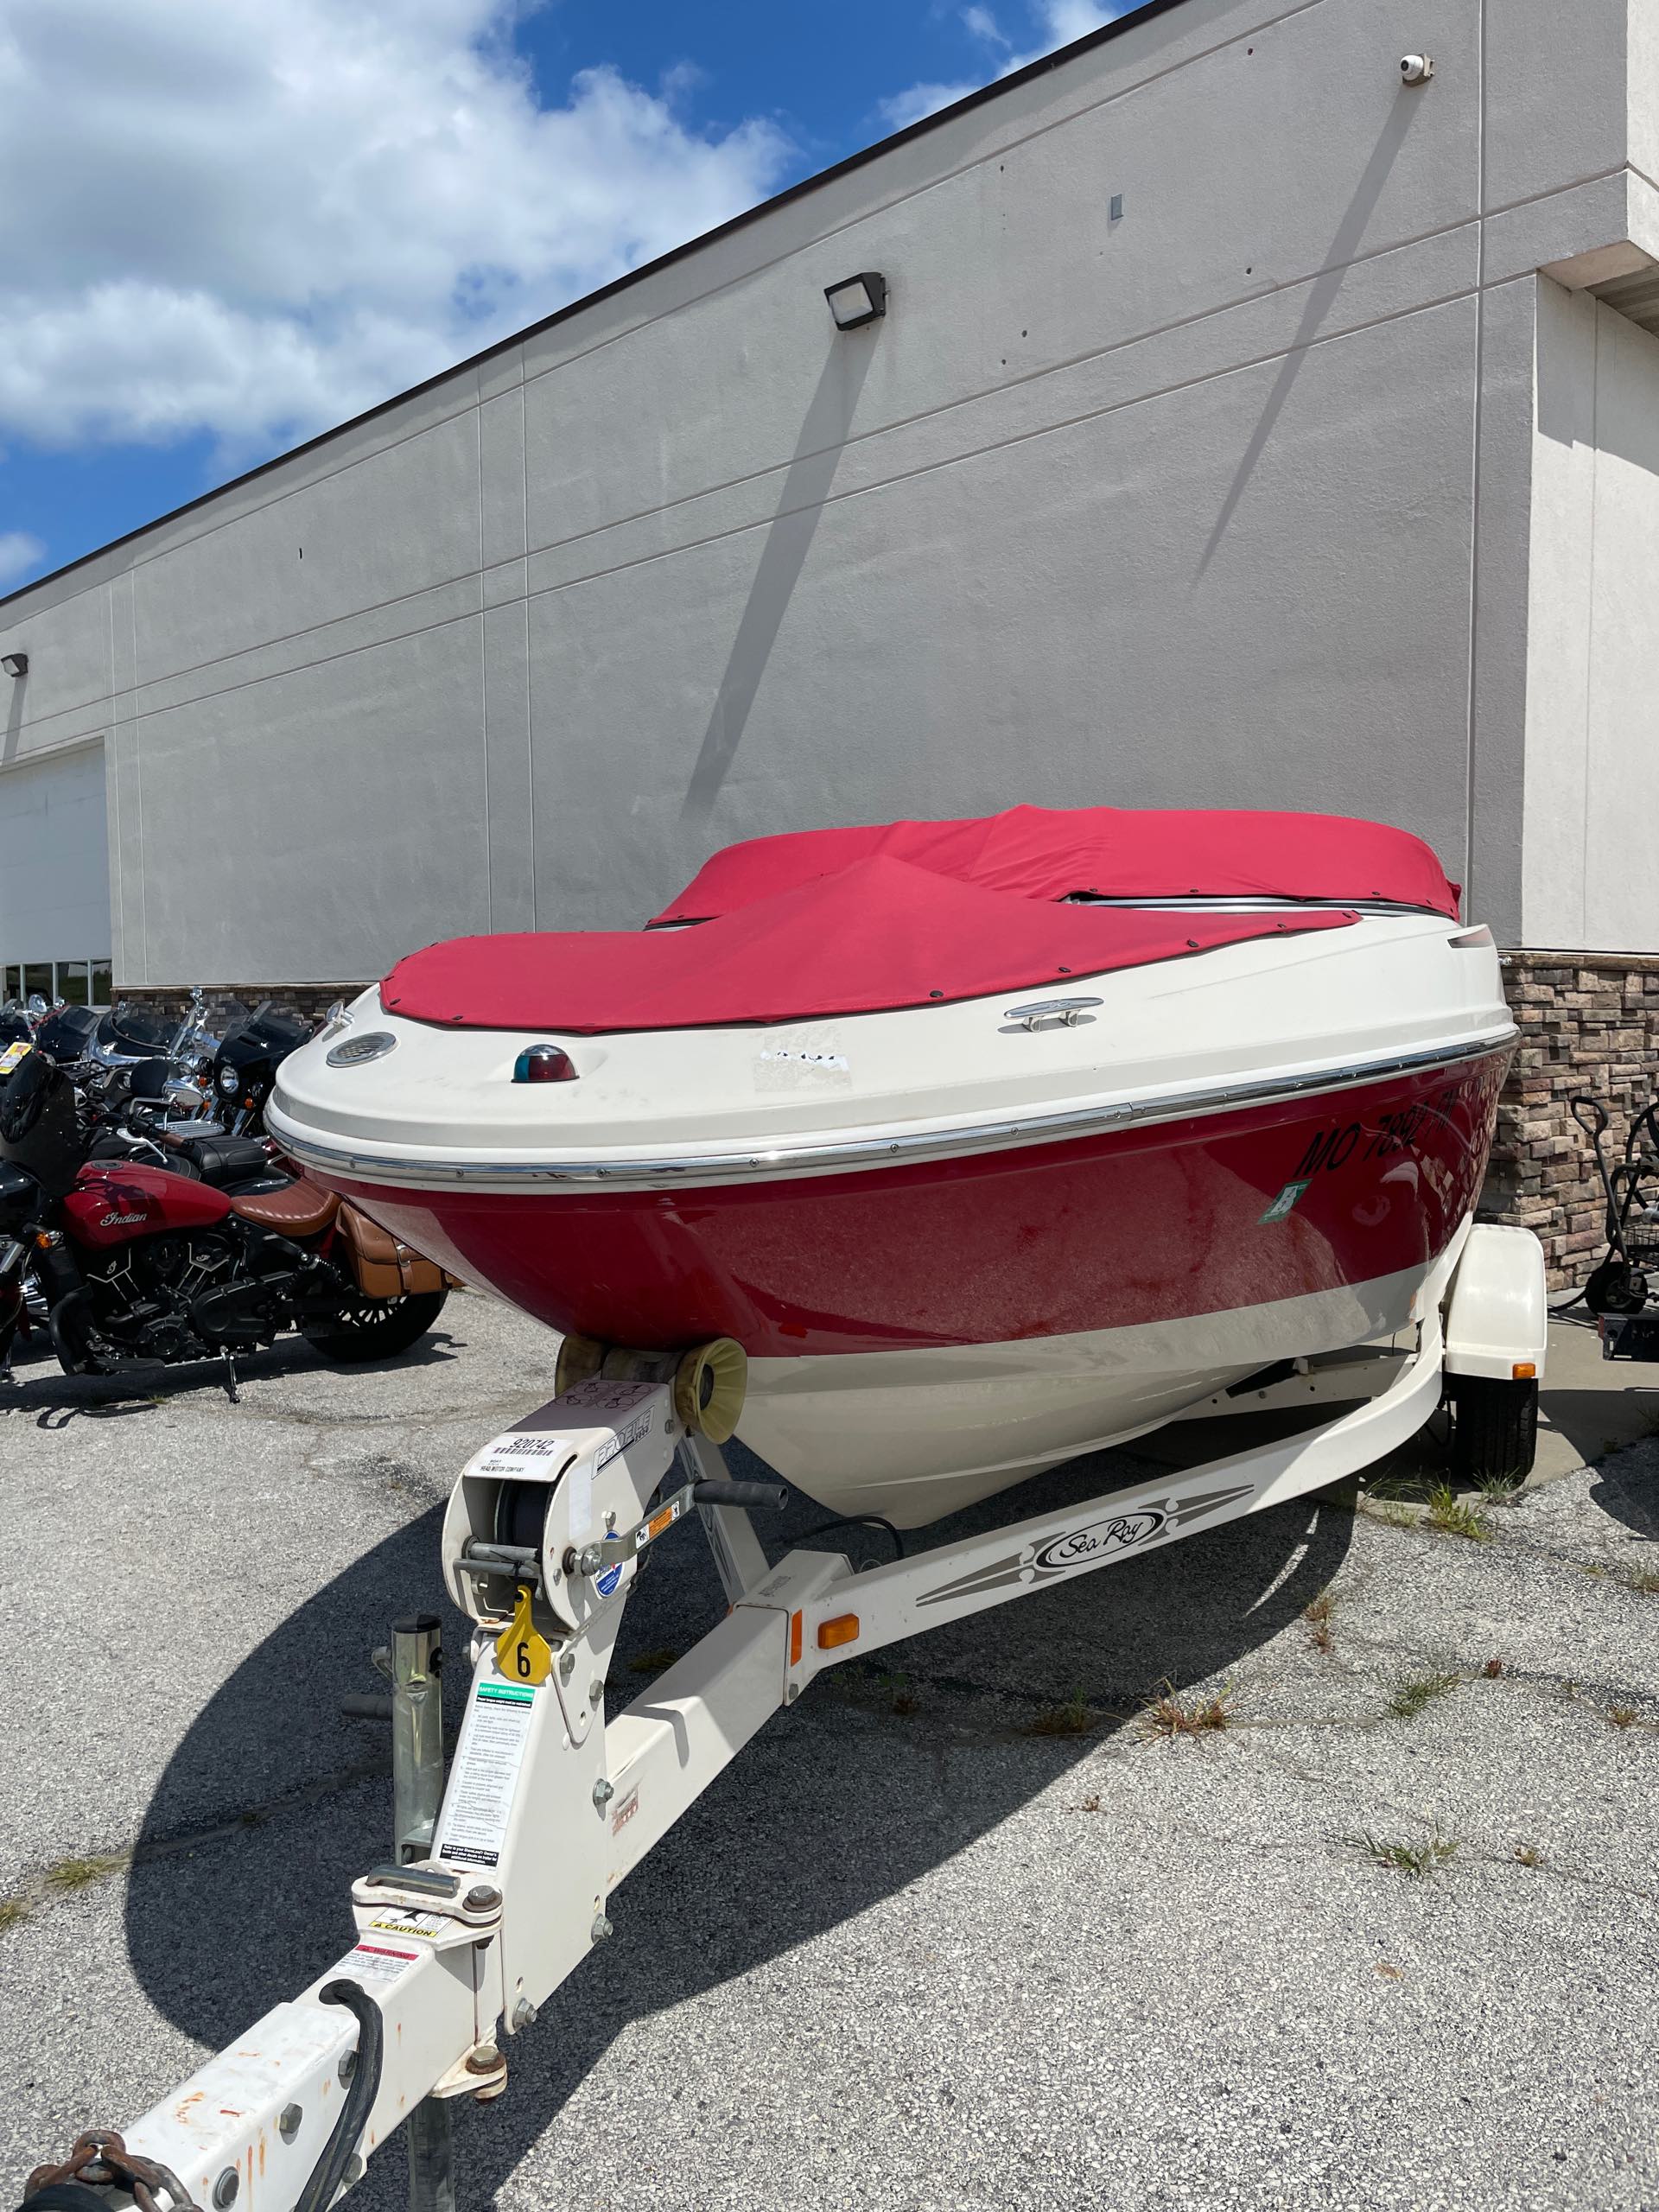 2007 Sea Ray 185 SPORT at Head Indian Motorcycle